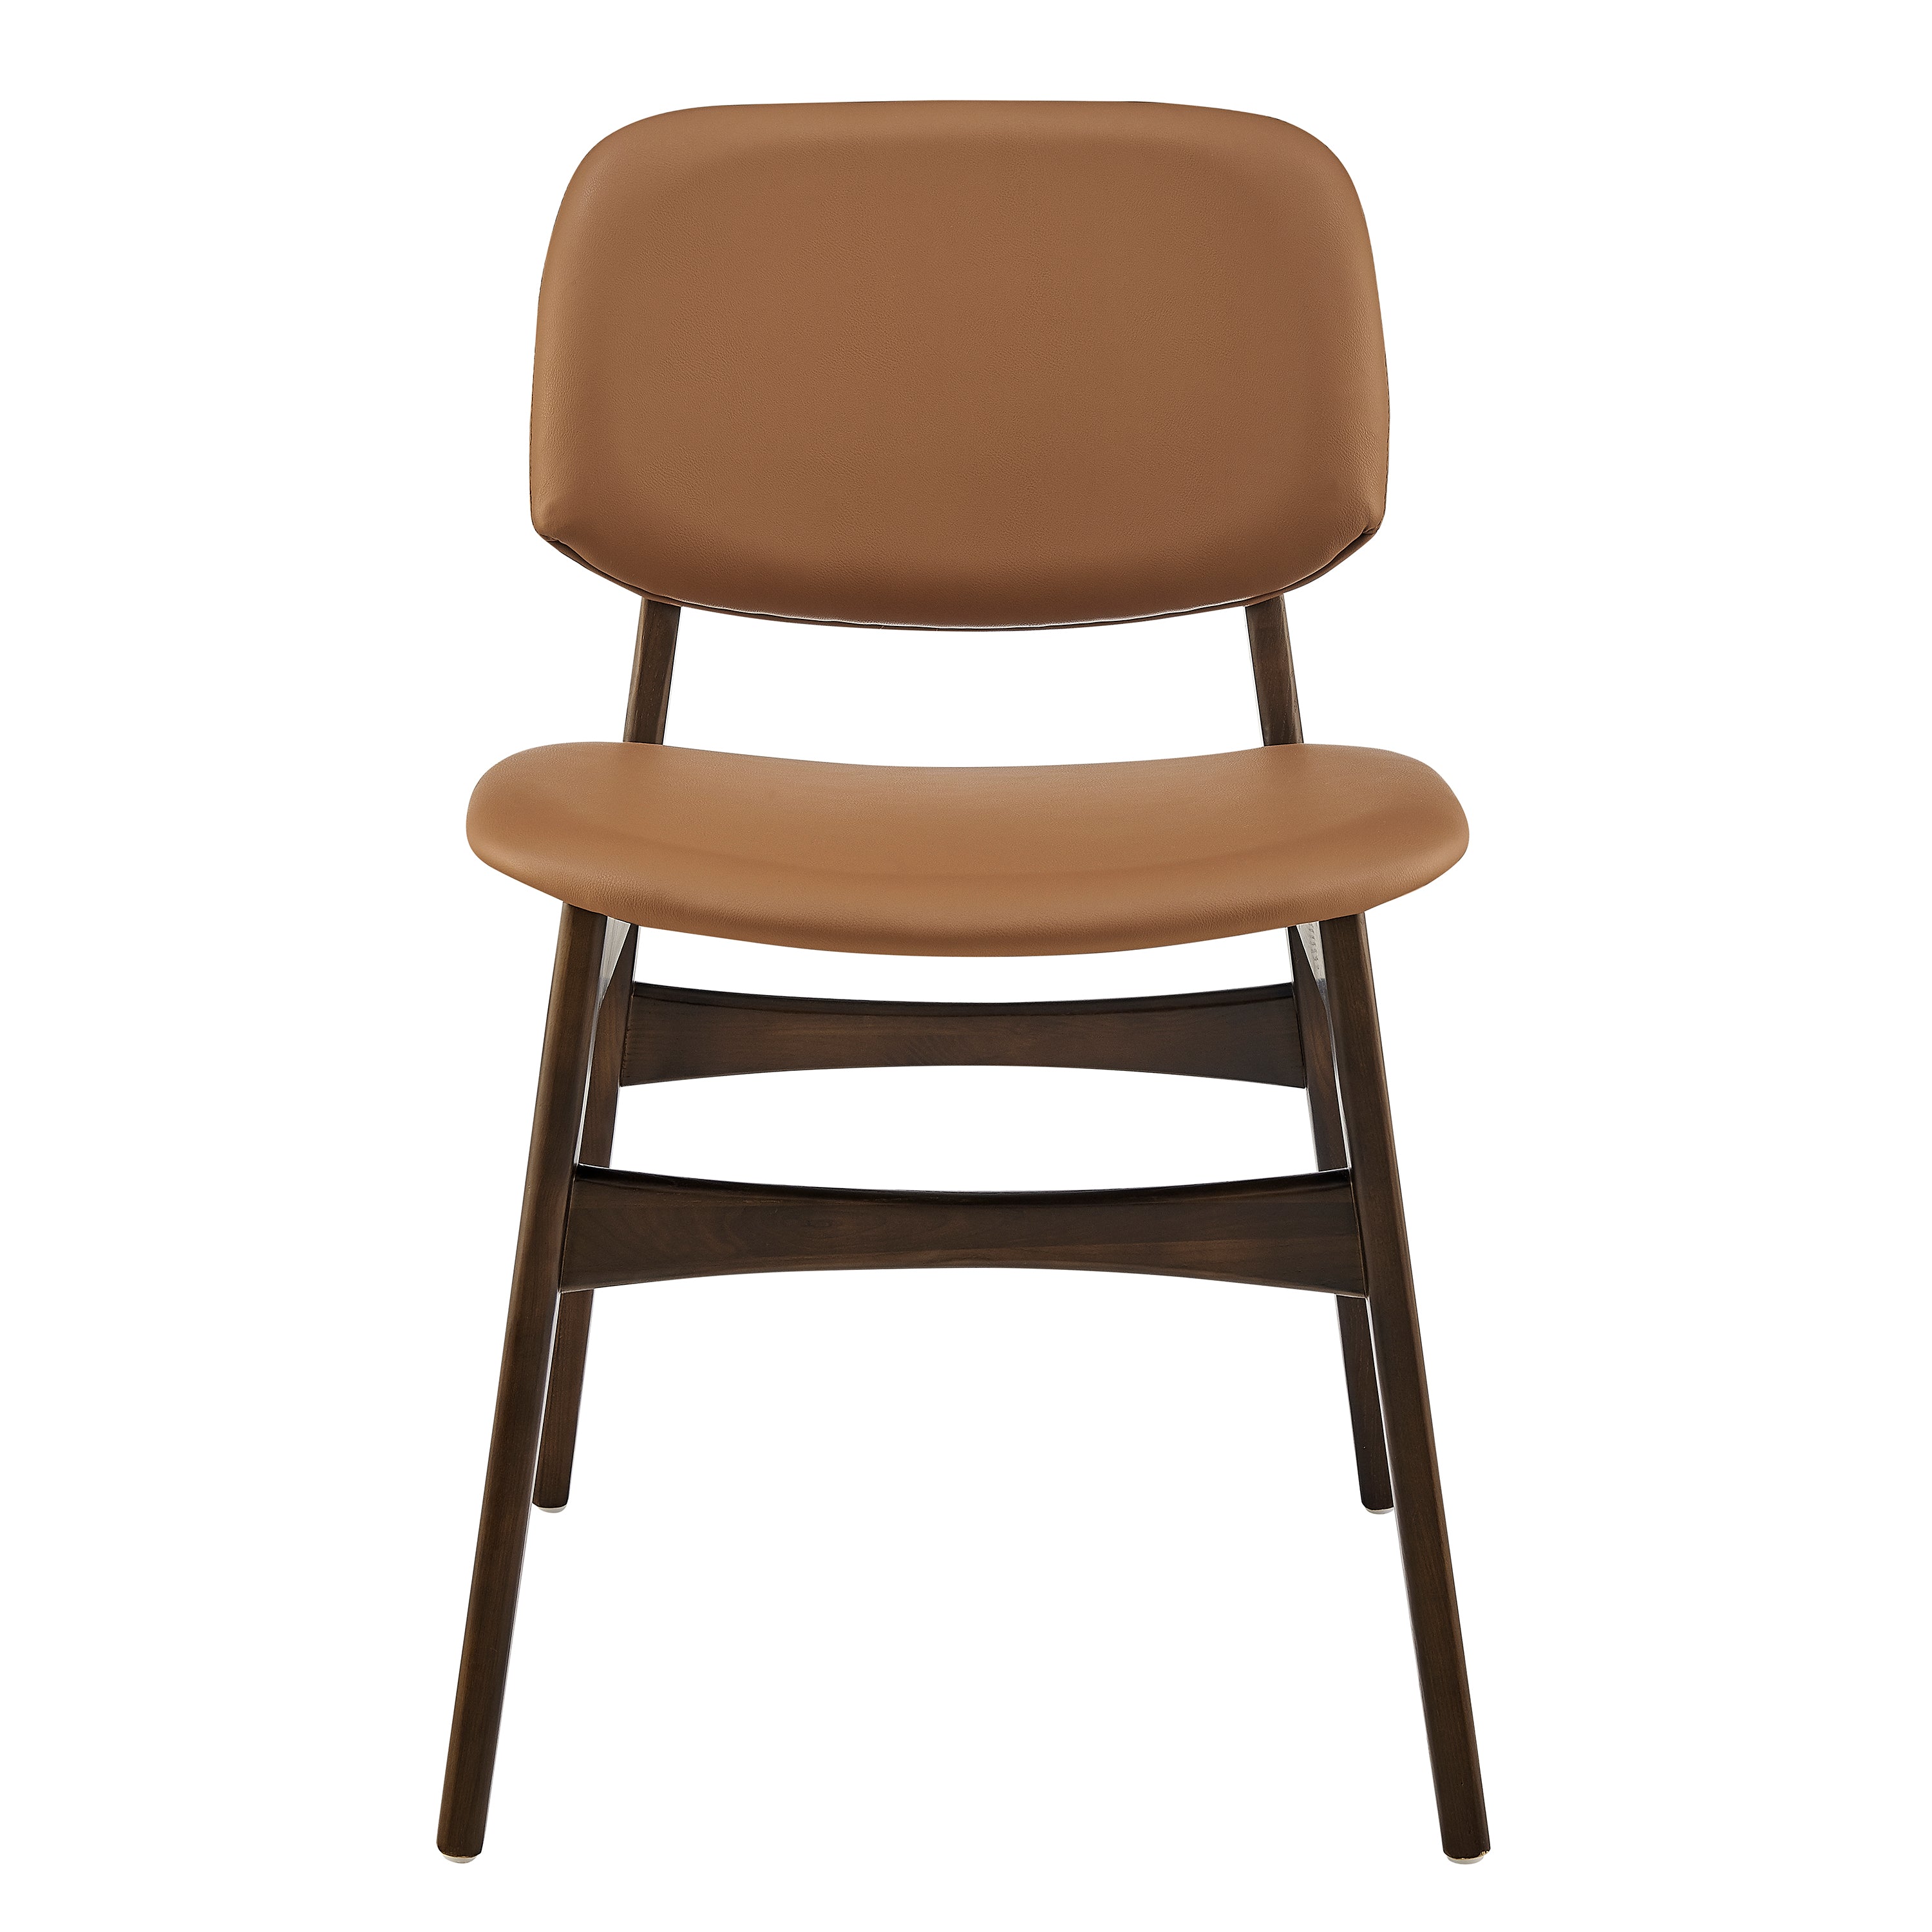 Euro Style Dining Chairs - Gunther Side Chair with Dark Tan Leatherette and Dark Walnut Frame - Set of 2